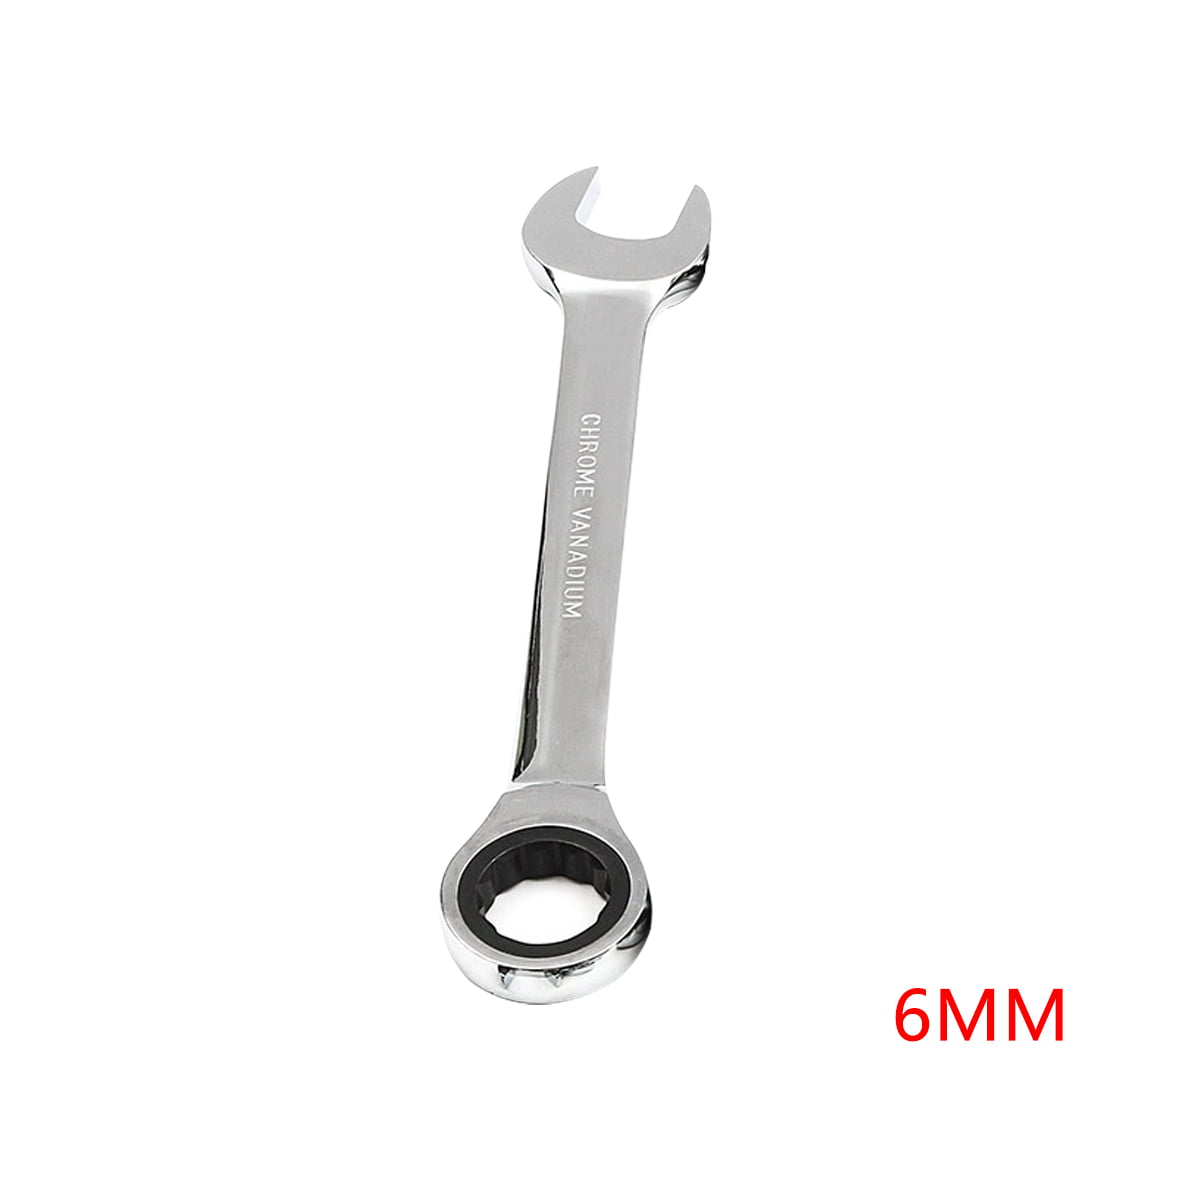 72 Tooth Ratchet Wrench For Car Maintain Wrench and Hand Repair Tools Finder 10mm Ratcheting Wrench Metric/MM Chrome Vanadium Steel